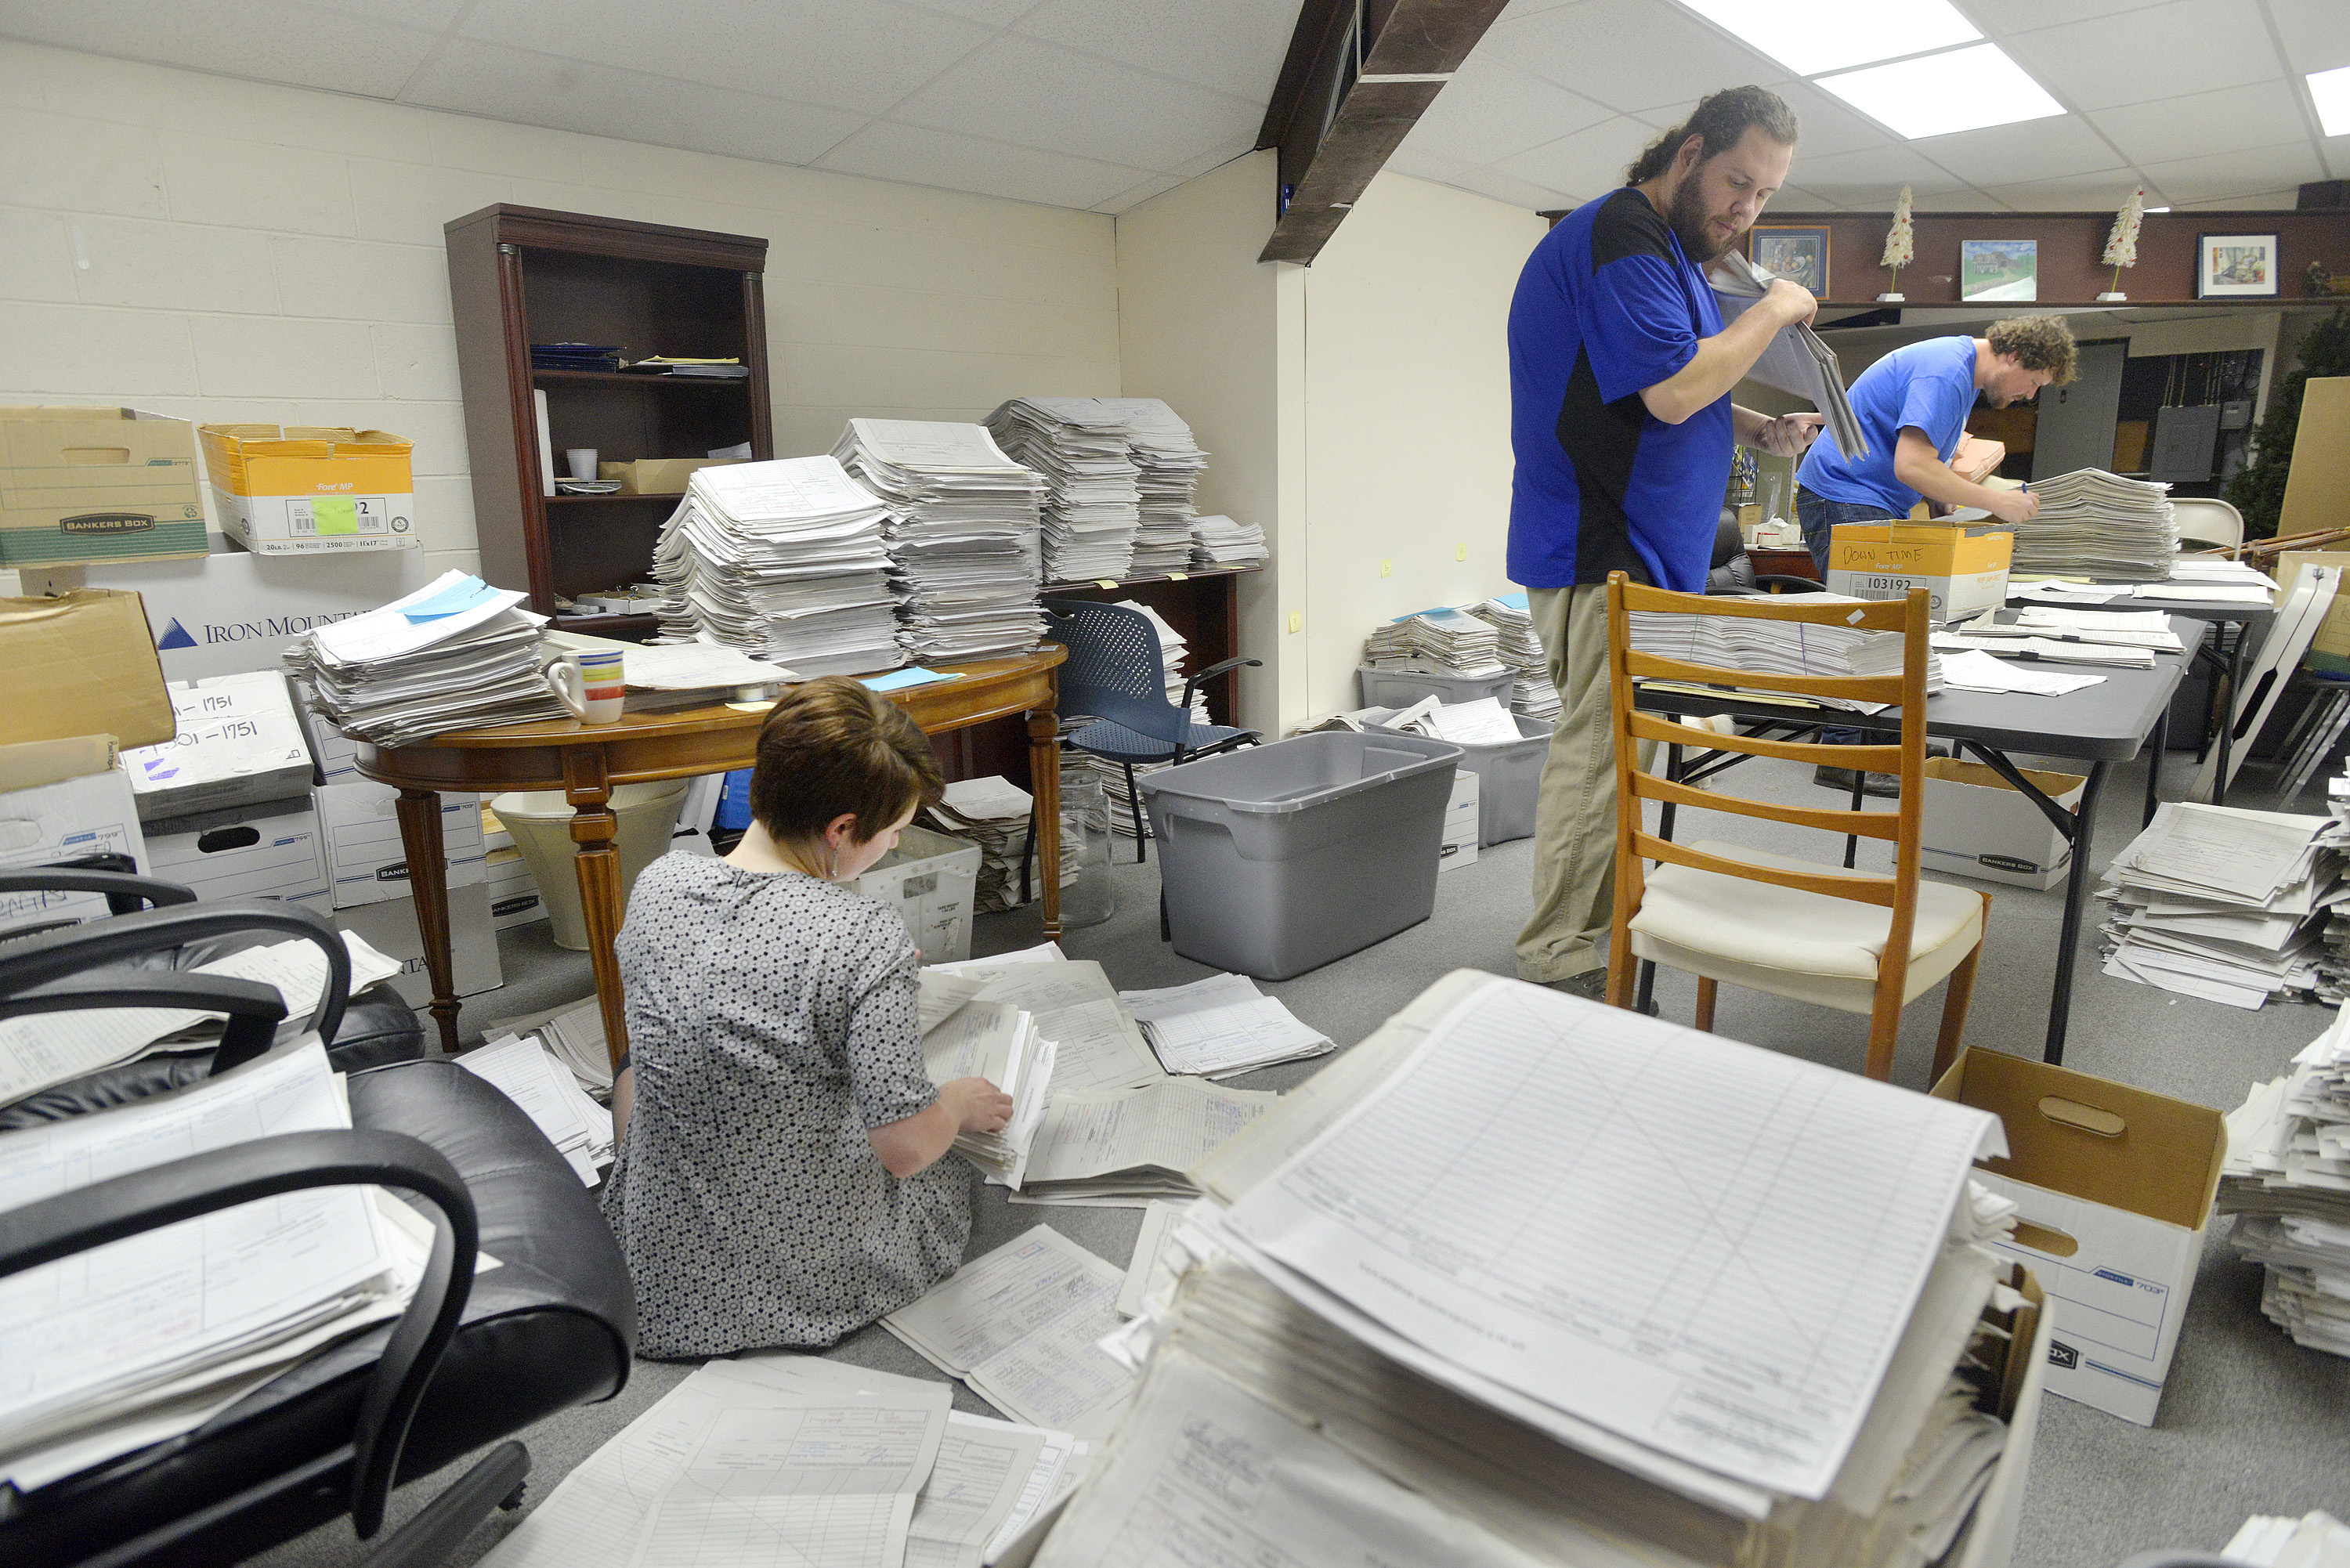 Staff and volunteers  for the marijuana legalization campaign are sorting petitions at their office in Falmouth. Volunteer Allison Cormier (left) along with office manager Shaun Bowen (center) and field director Jordan DeCoster sort and organize stacks of petitions at their campaign headquarters. (2016 Portland Press Herald)